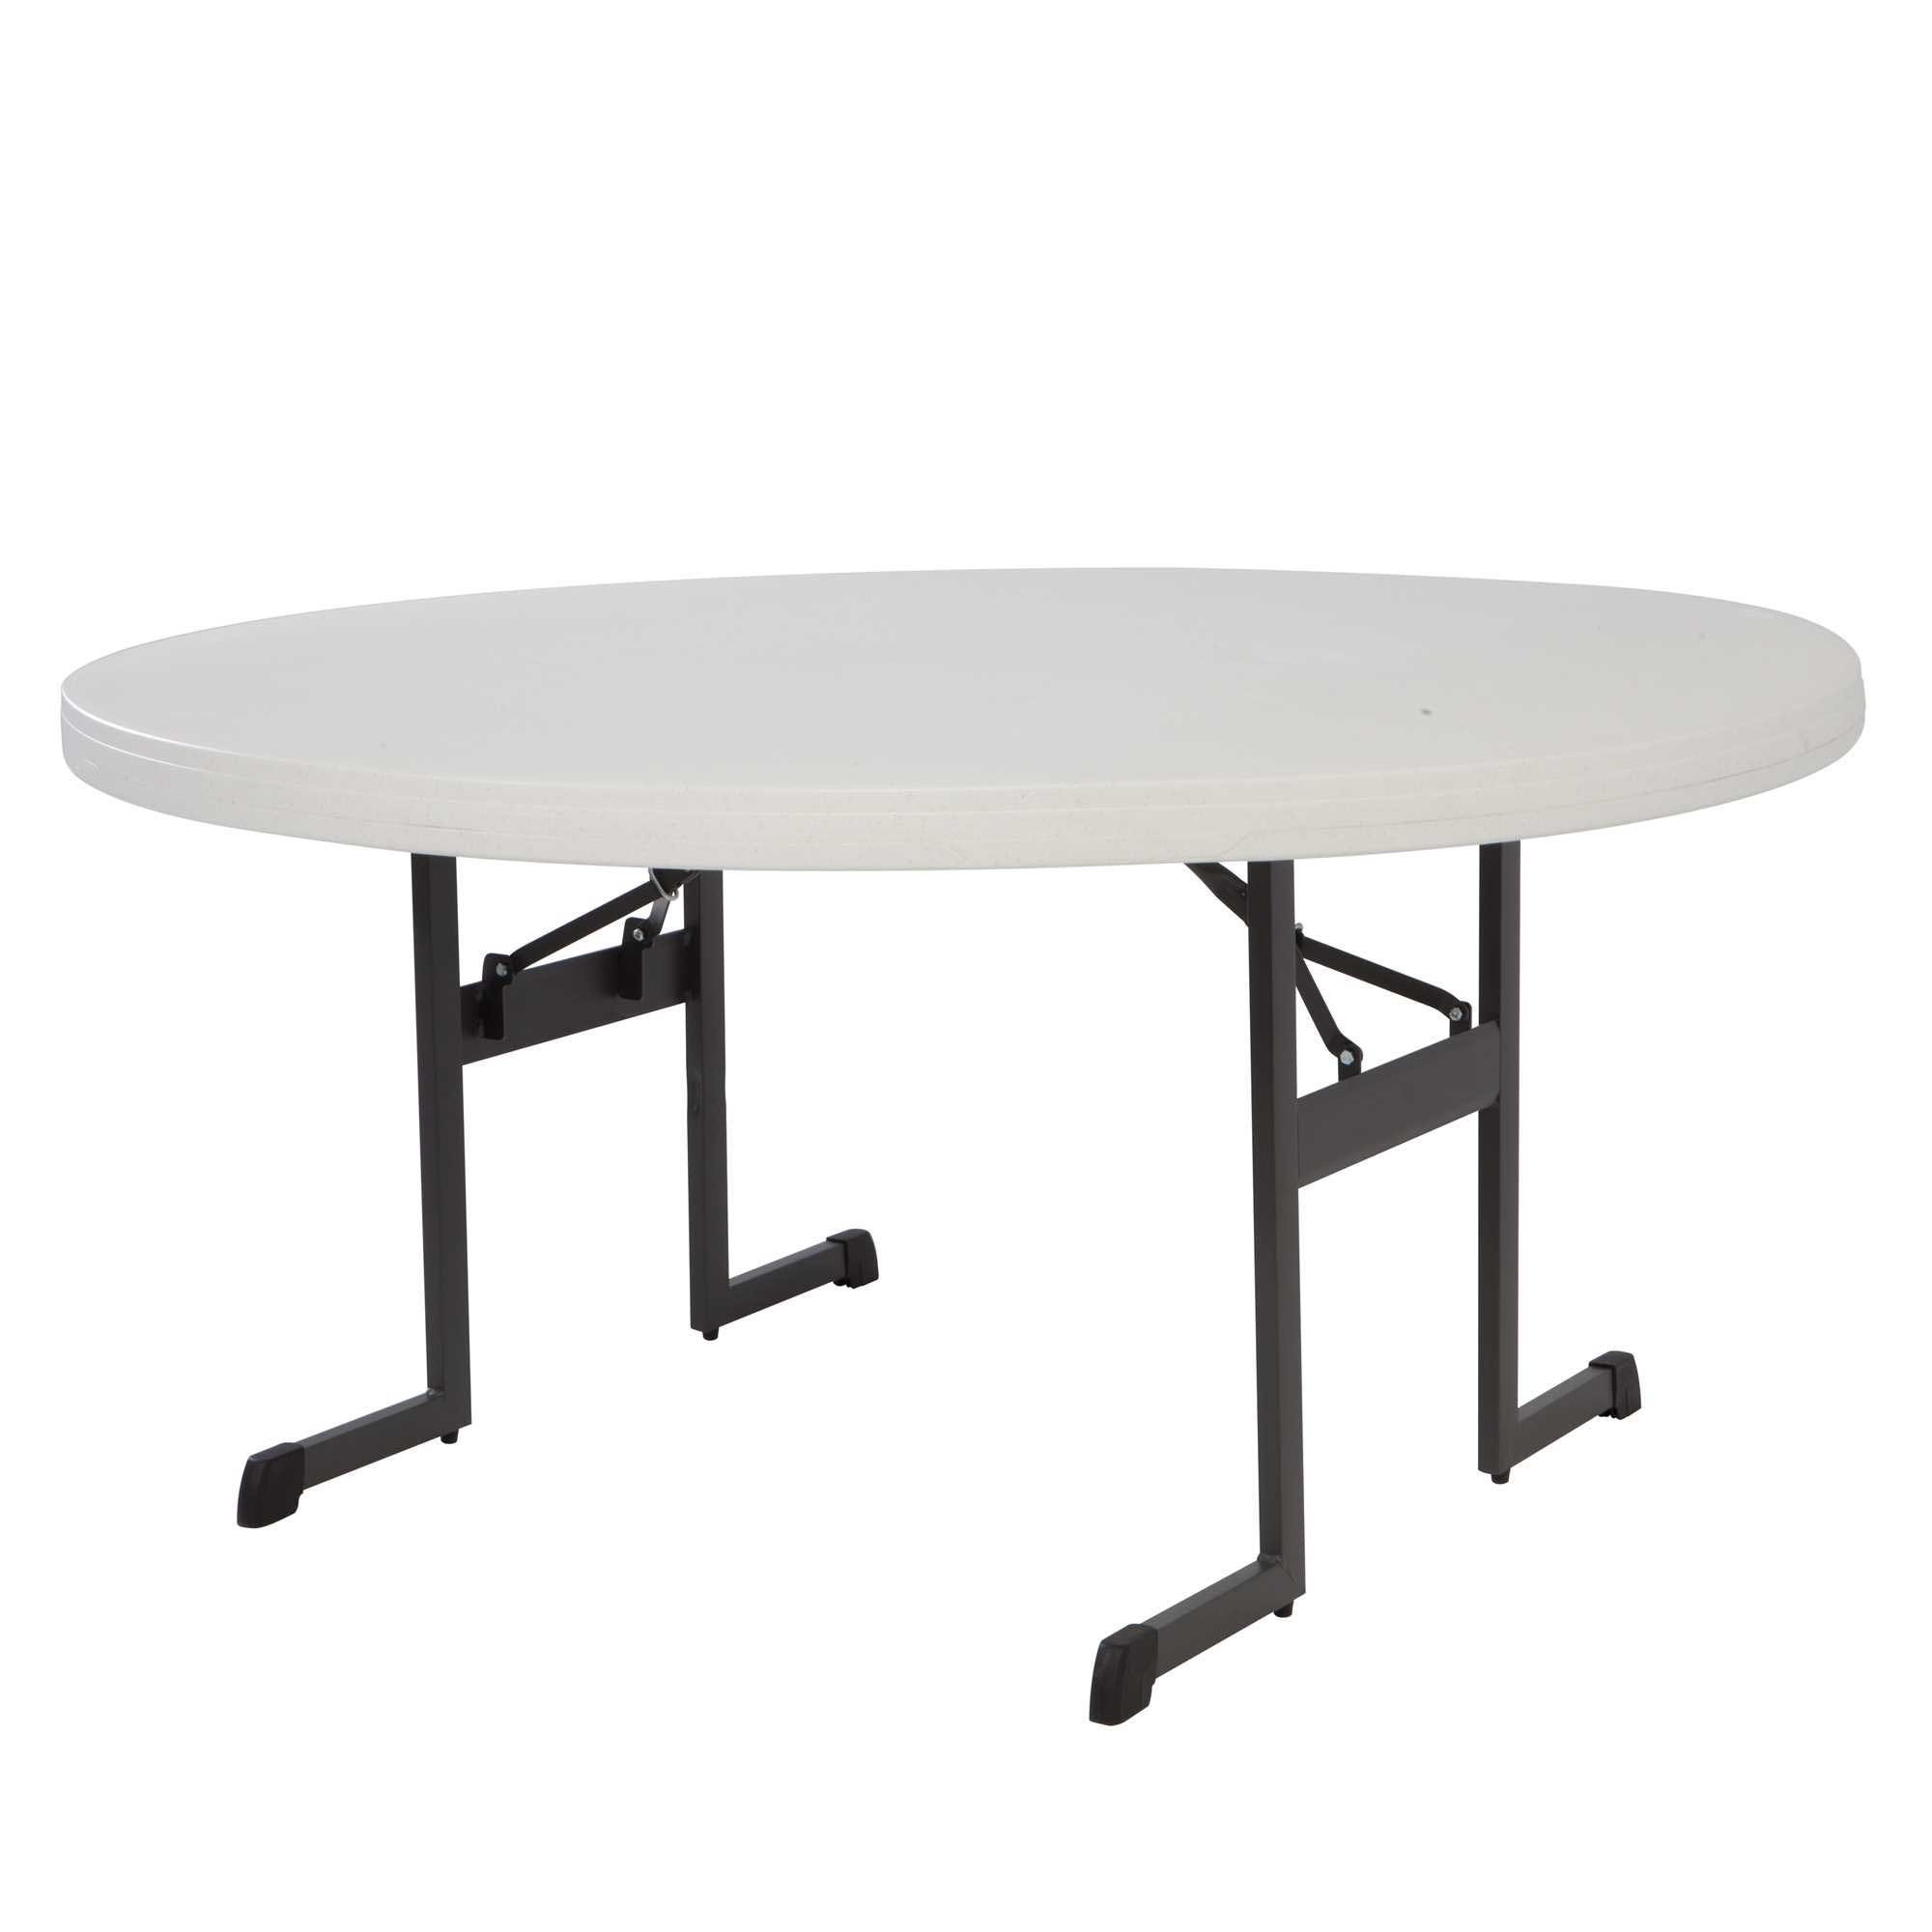 Lifetime round folding tables 480125 putty color 60 inch tab